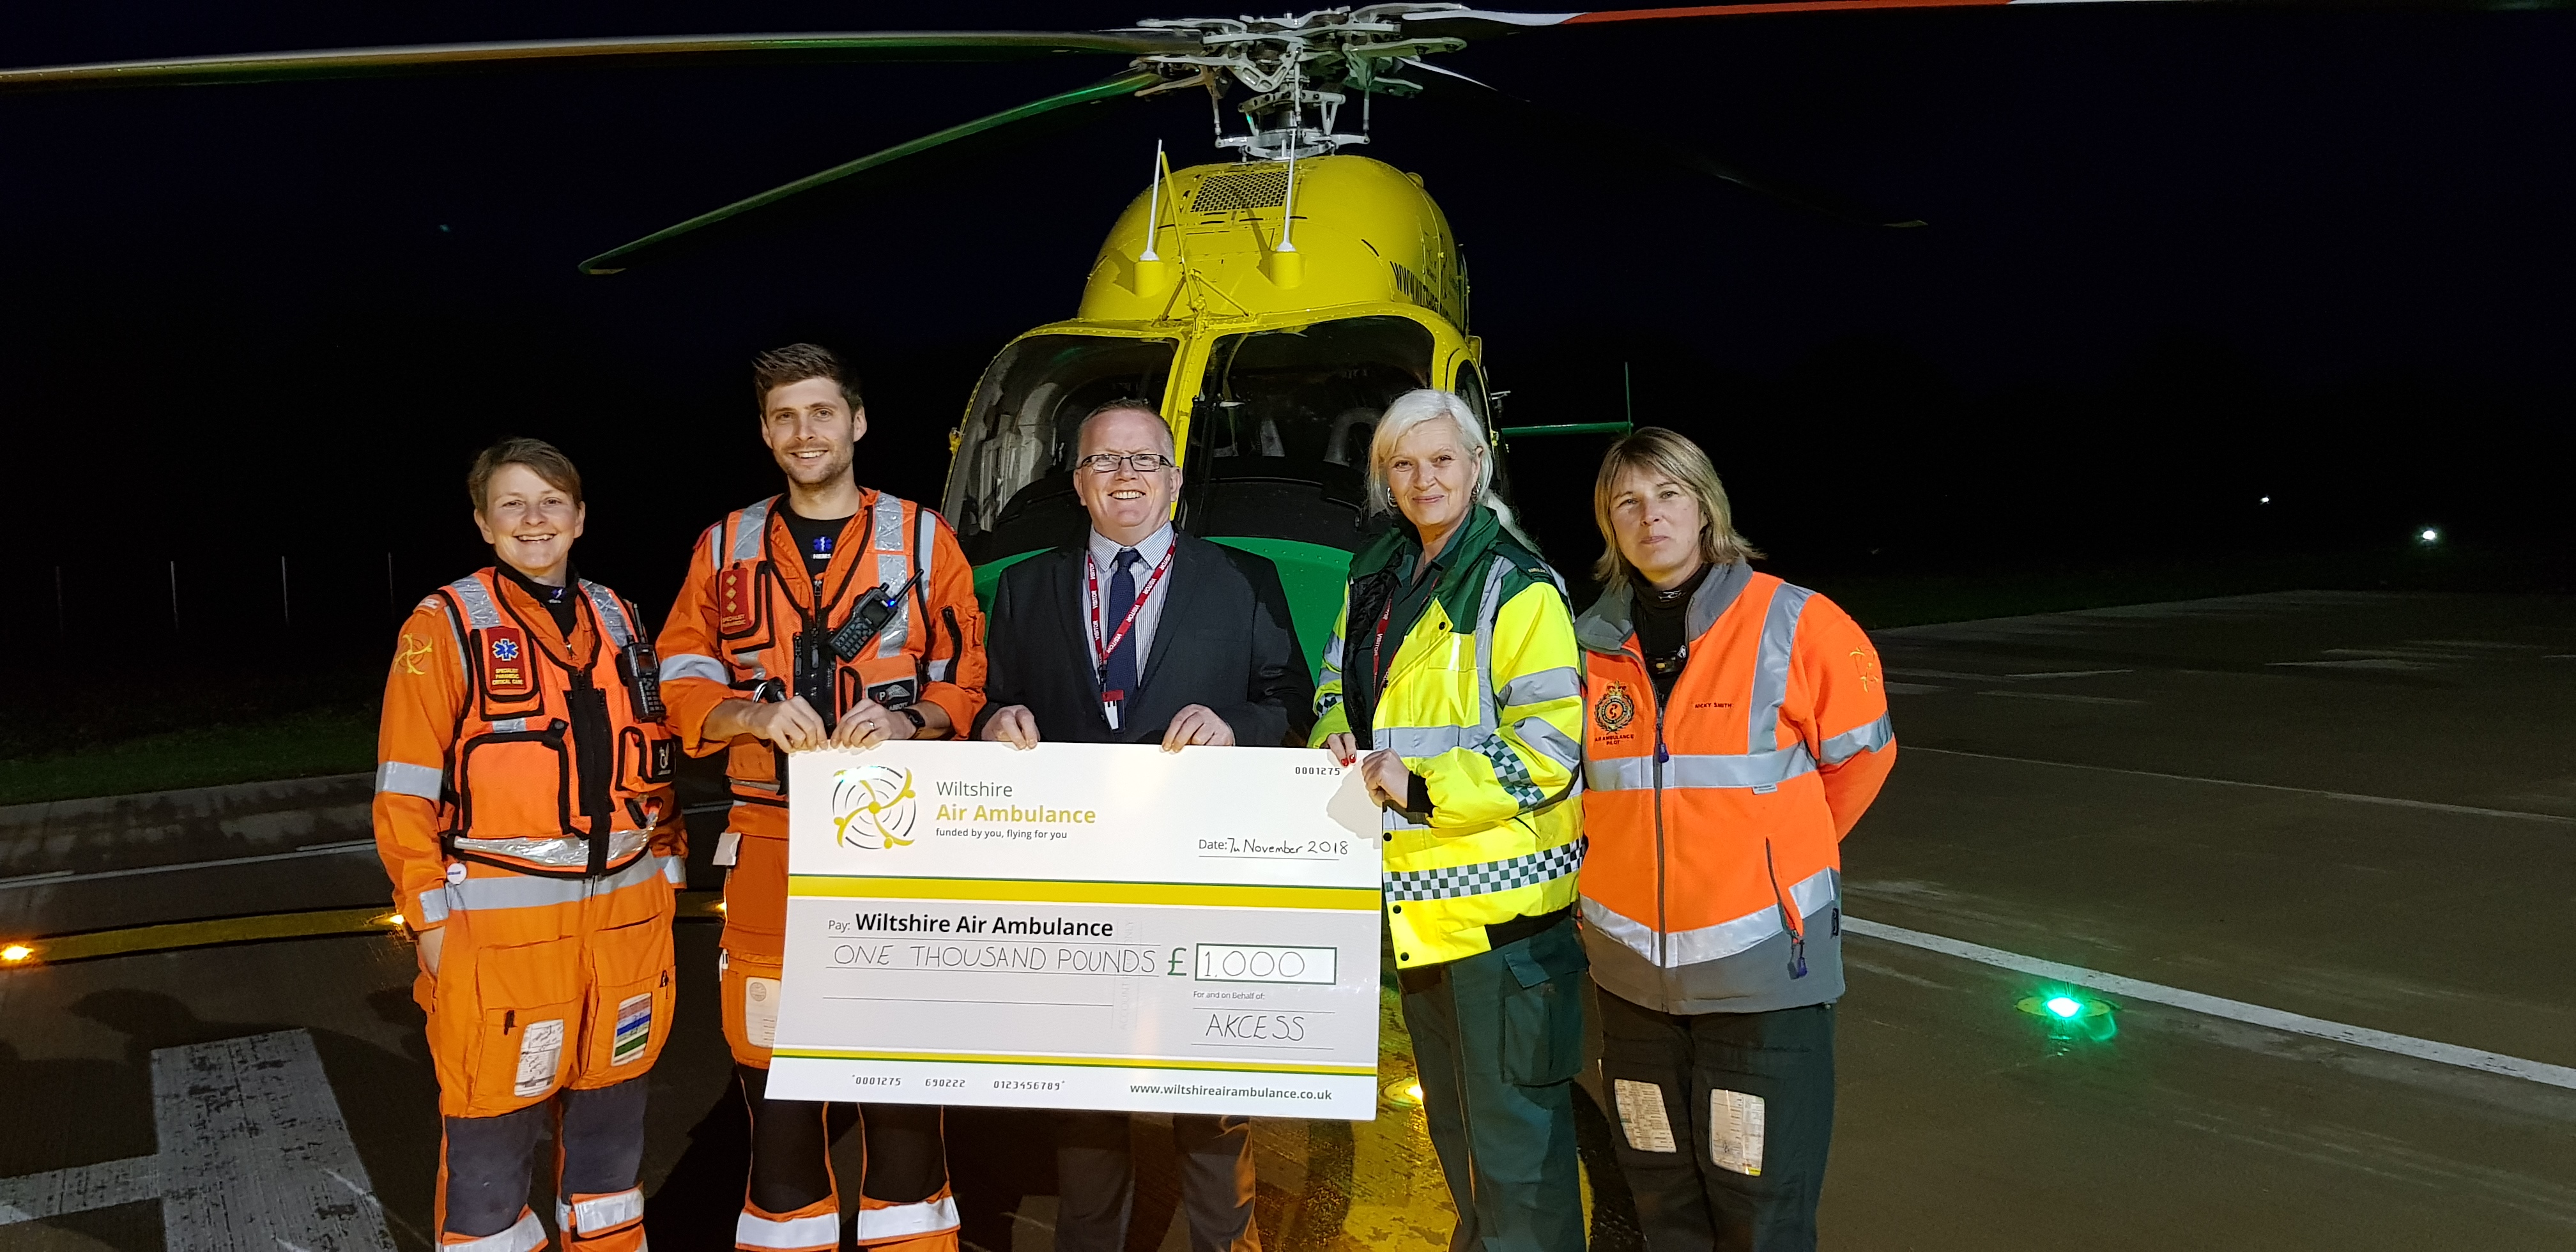 Dave Hyde and Tracey Mason, of Akcess Medical, with (from left) Wiltshire Air Ambulance paramedics Louise Cox and Ben Abbott, and pilot Nicky Smith.